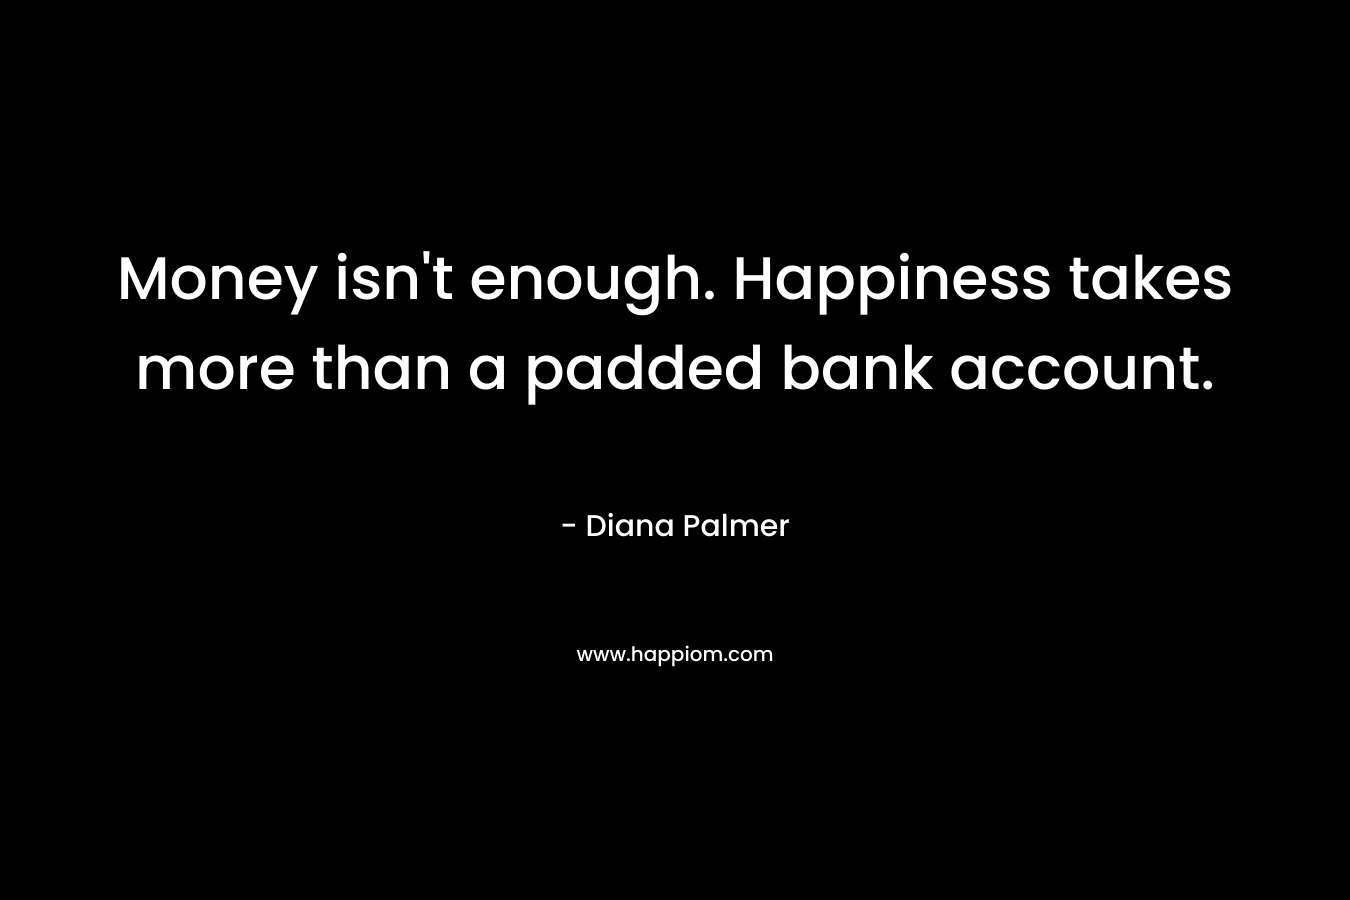 Money isn't enough. Happiness takes more than a padded bank account.